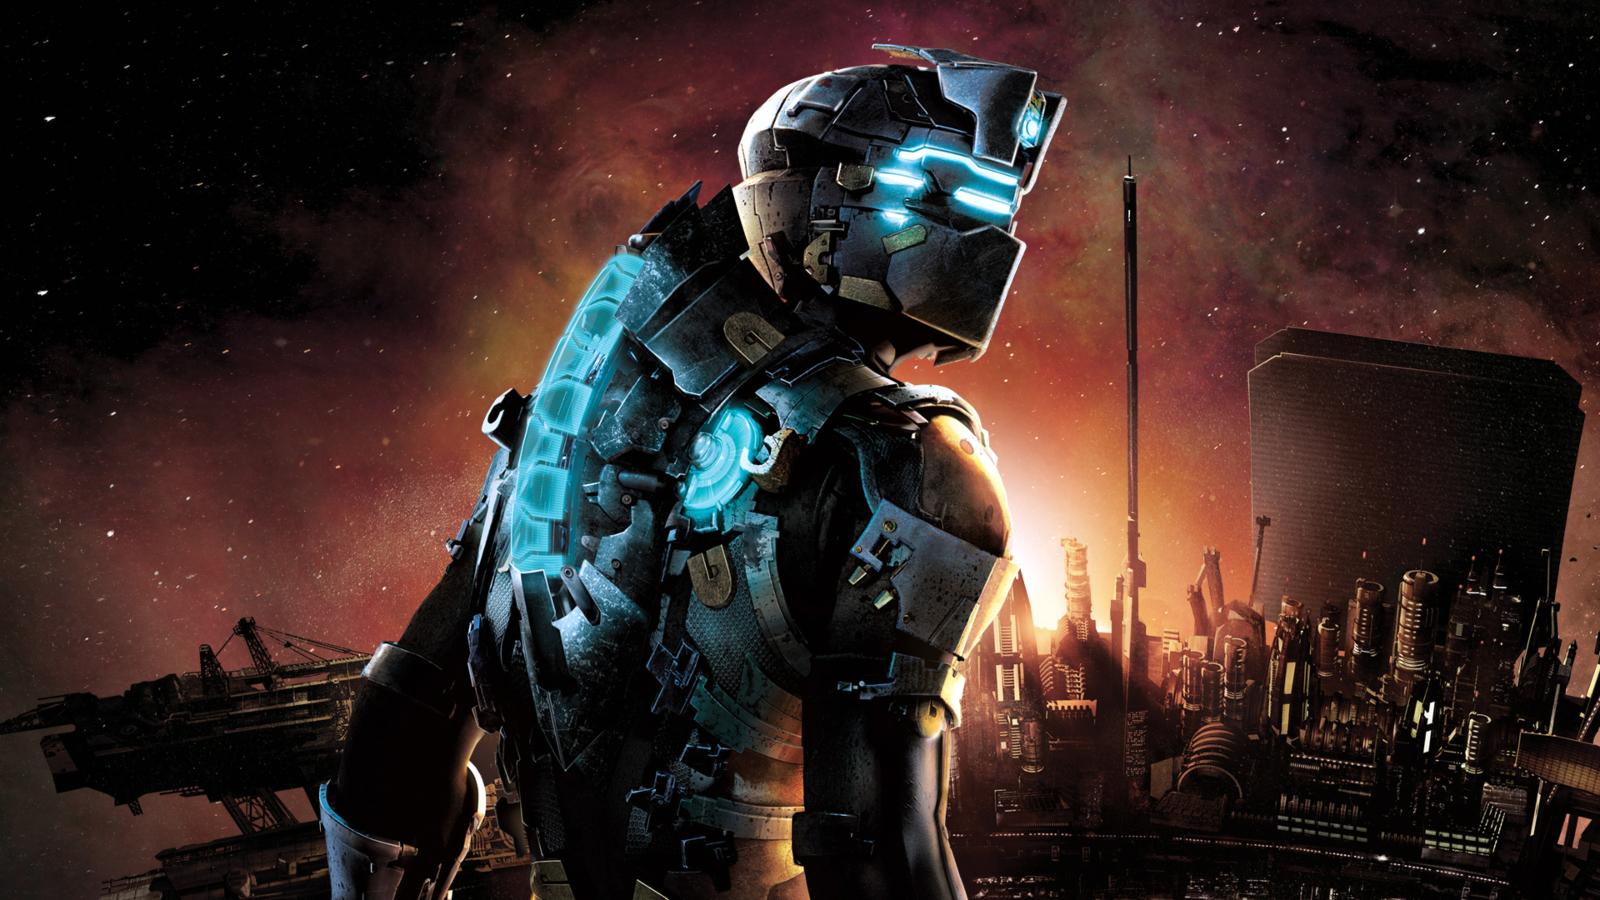 Dead Space 2 key art with Isaac Clarke